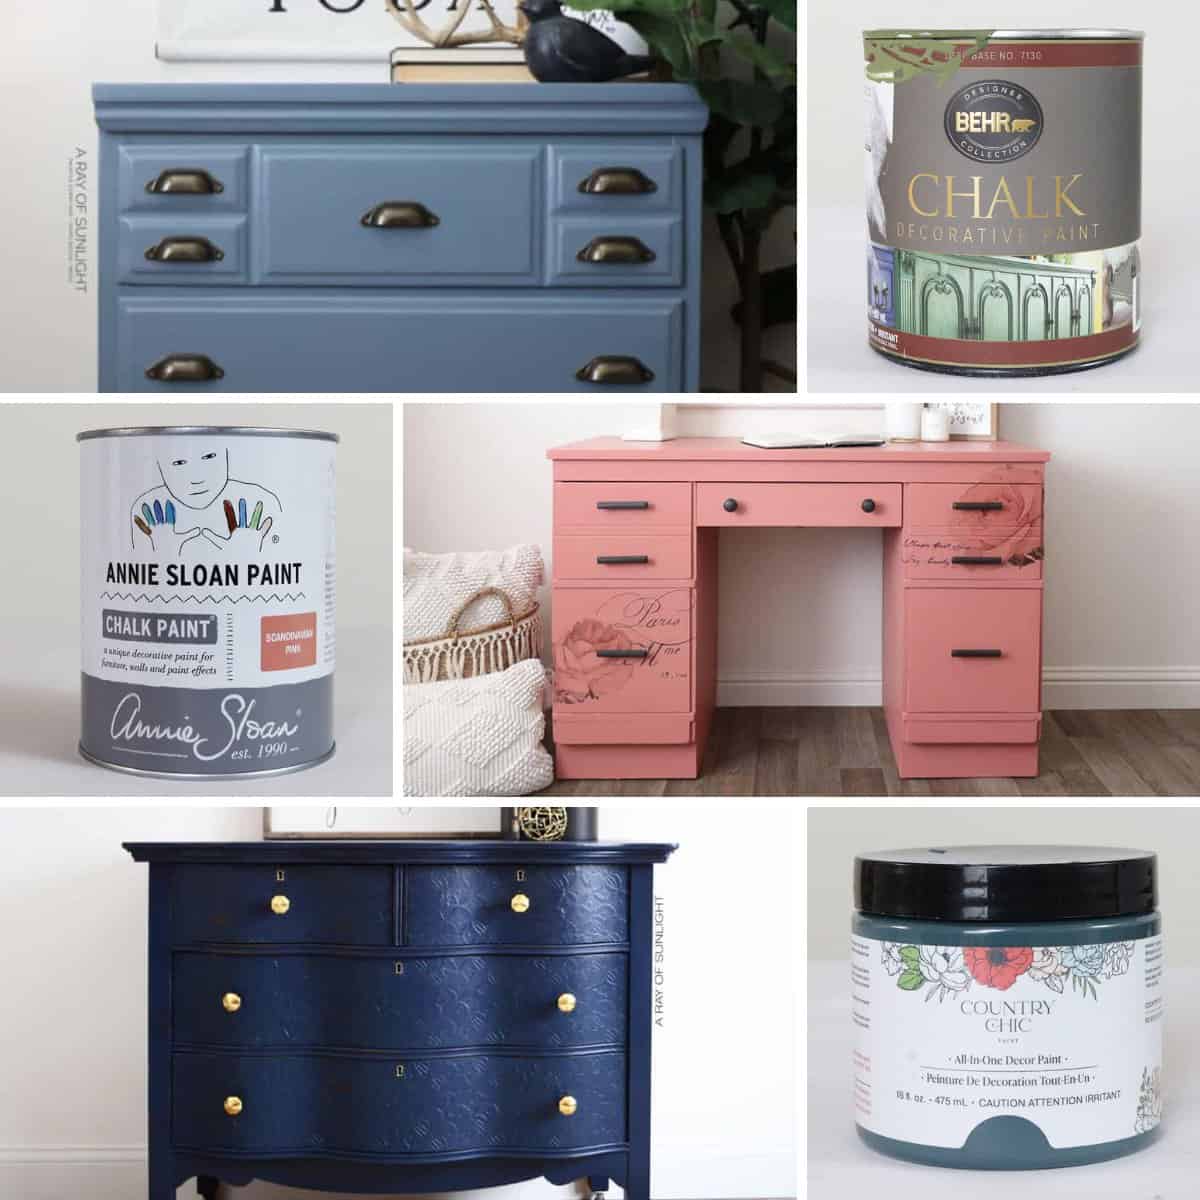 The Truth About Using Chalk Paint for Furniture